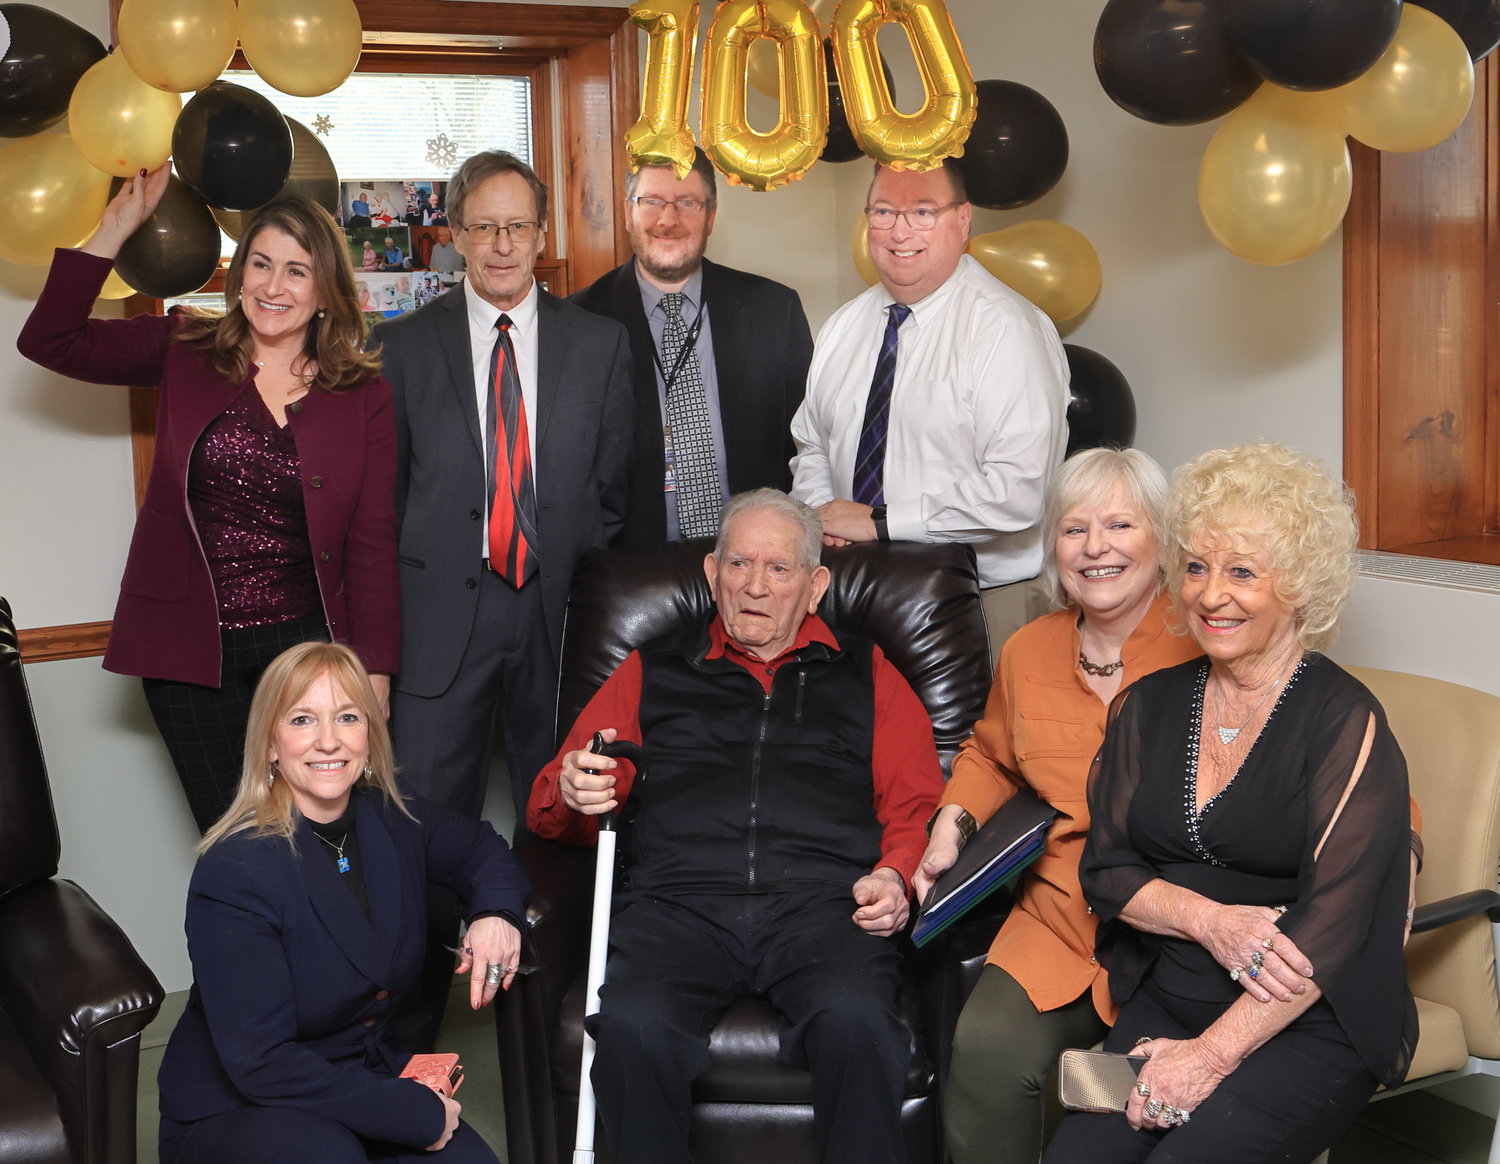 Raymond “Ray” Naholnik posed for photos with his three daughters and local officials at the celebration of his 100th birthday at the Adult Daily Living Center in Hawley, PA. Pictured are, in front: Sherrie Miller, left; Raymond; Jeannie Torrick; and Sandy Culp. In the back row are pictured PA Sen. Rosemary Brown, left; Hawley mayor John Nichols; Wayne County chief clerk Andrew Seder; and PA Rep. Joe Adams.